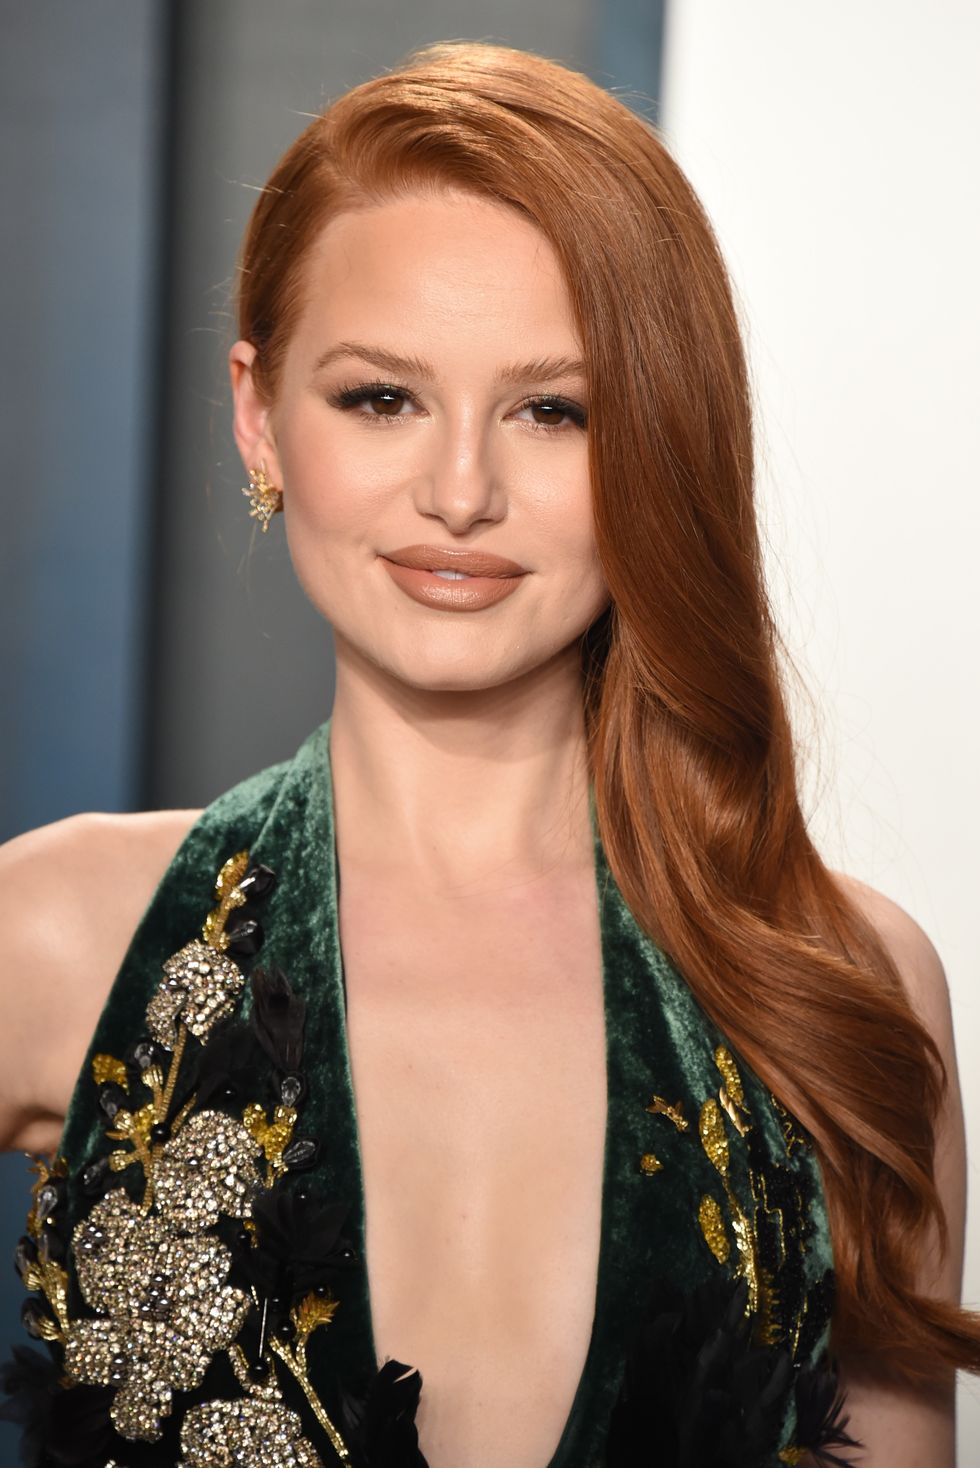 https://hips.hearstapps.com/hmg-prod/images/madelaine-petsch-attends-the-2020-vanity-fair-oscar-party-news-photo-1582048062.jpg?crop=0.947xw:1.00xh;0.0374xw,0.00120xh&resize=980:*